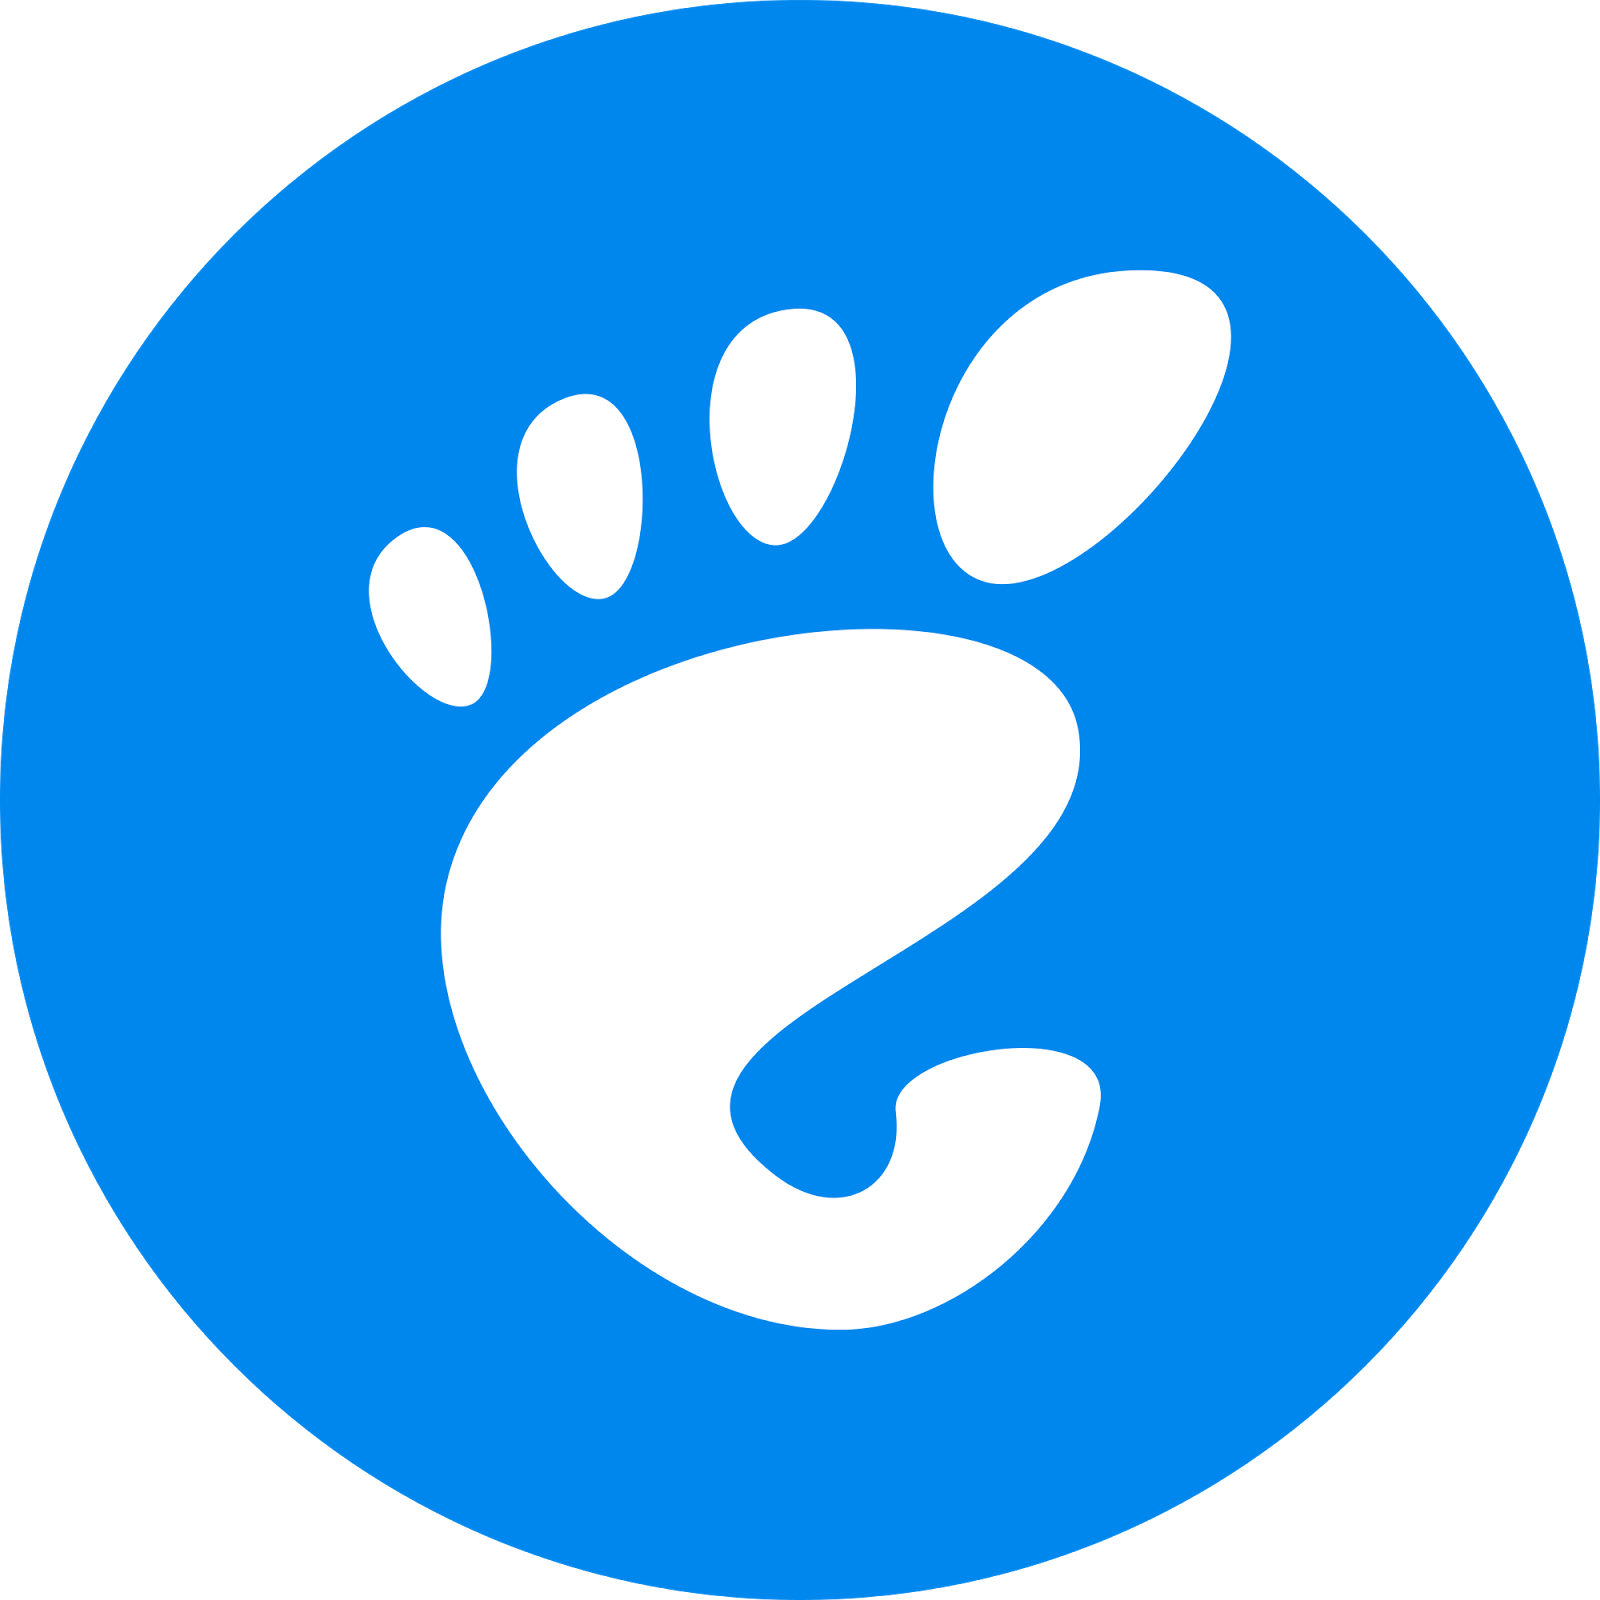 Puppy linux 32 bit iso download